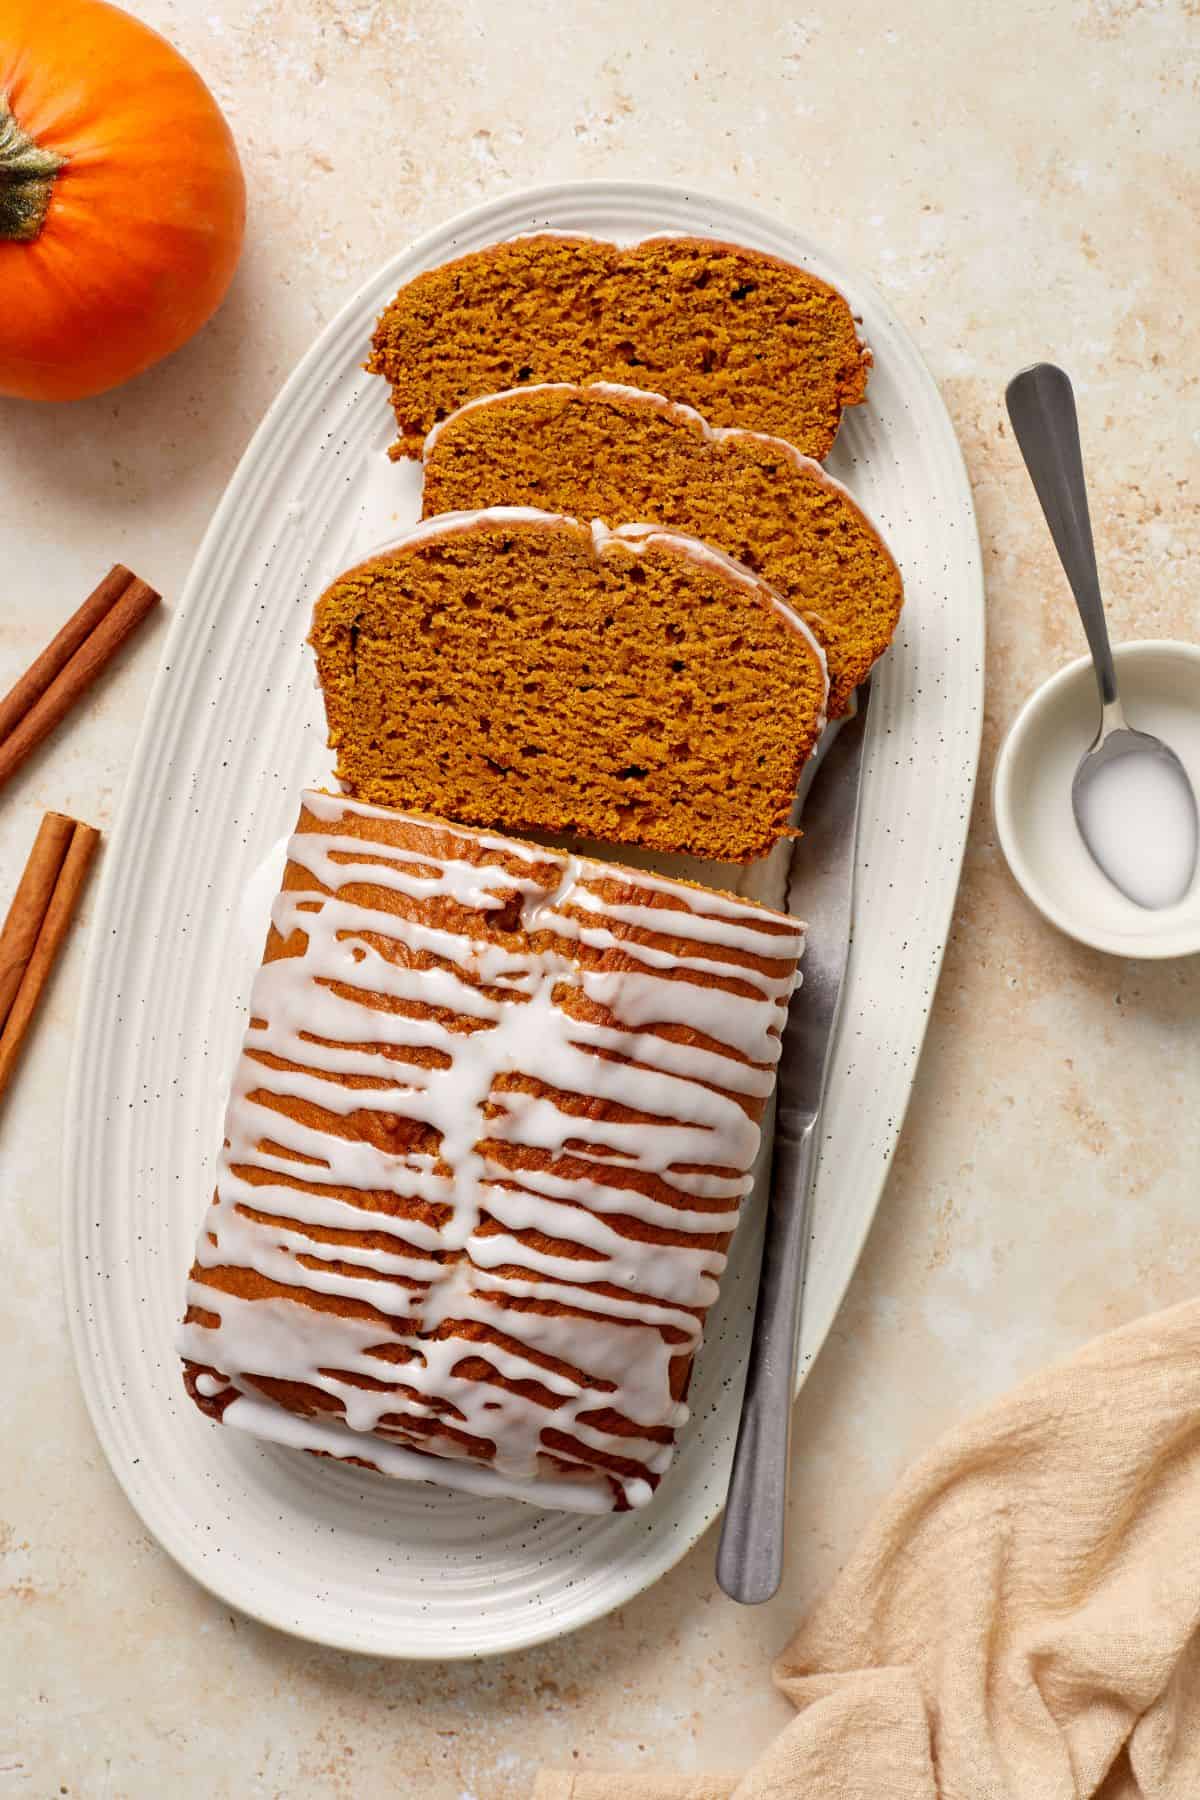 Pumpkin Loaf Cake, with three slices cut, sitting on a white oval platter, with a knife on the side.